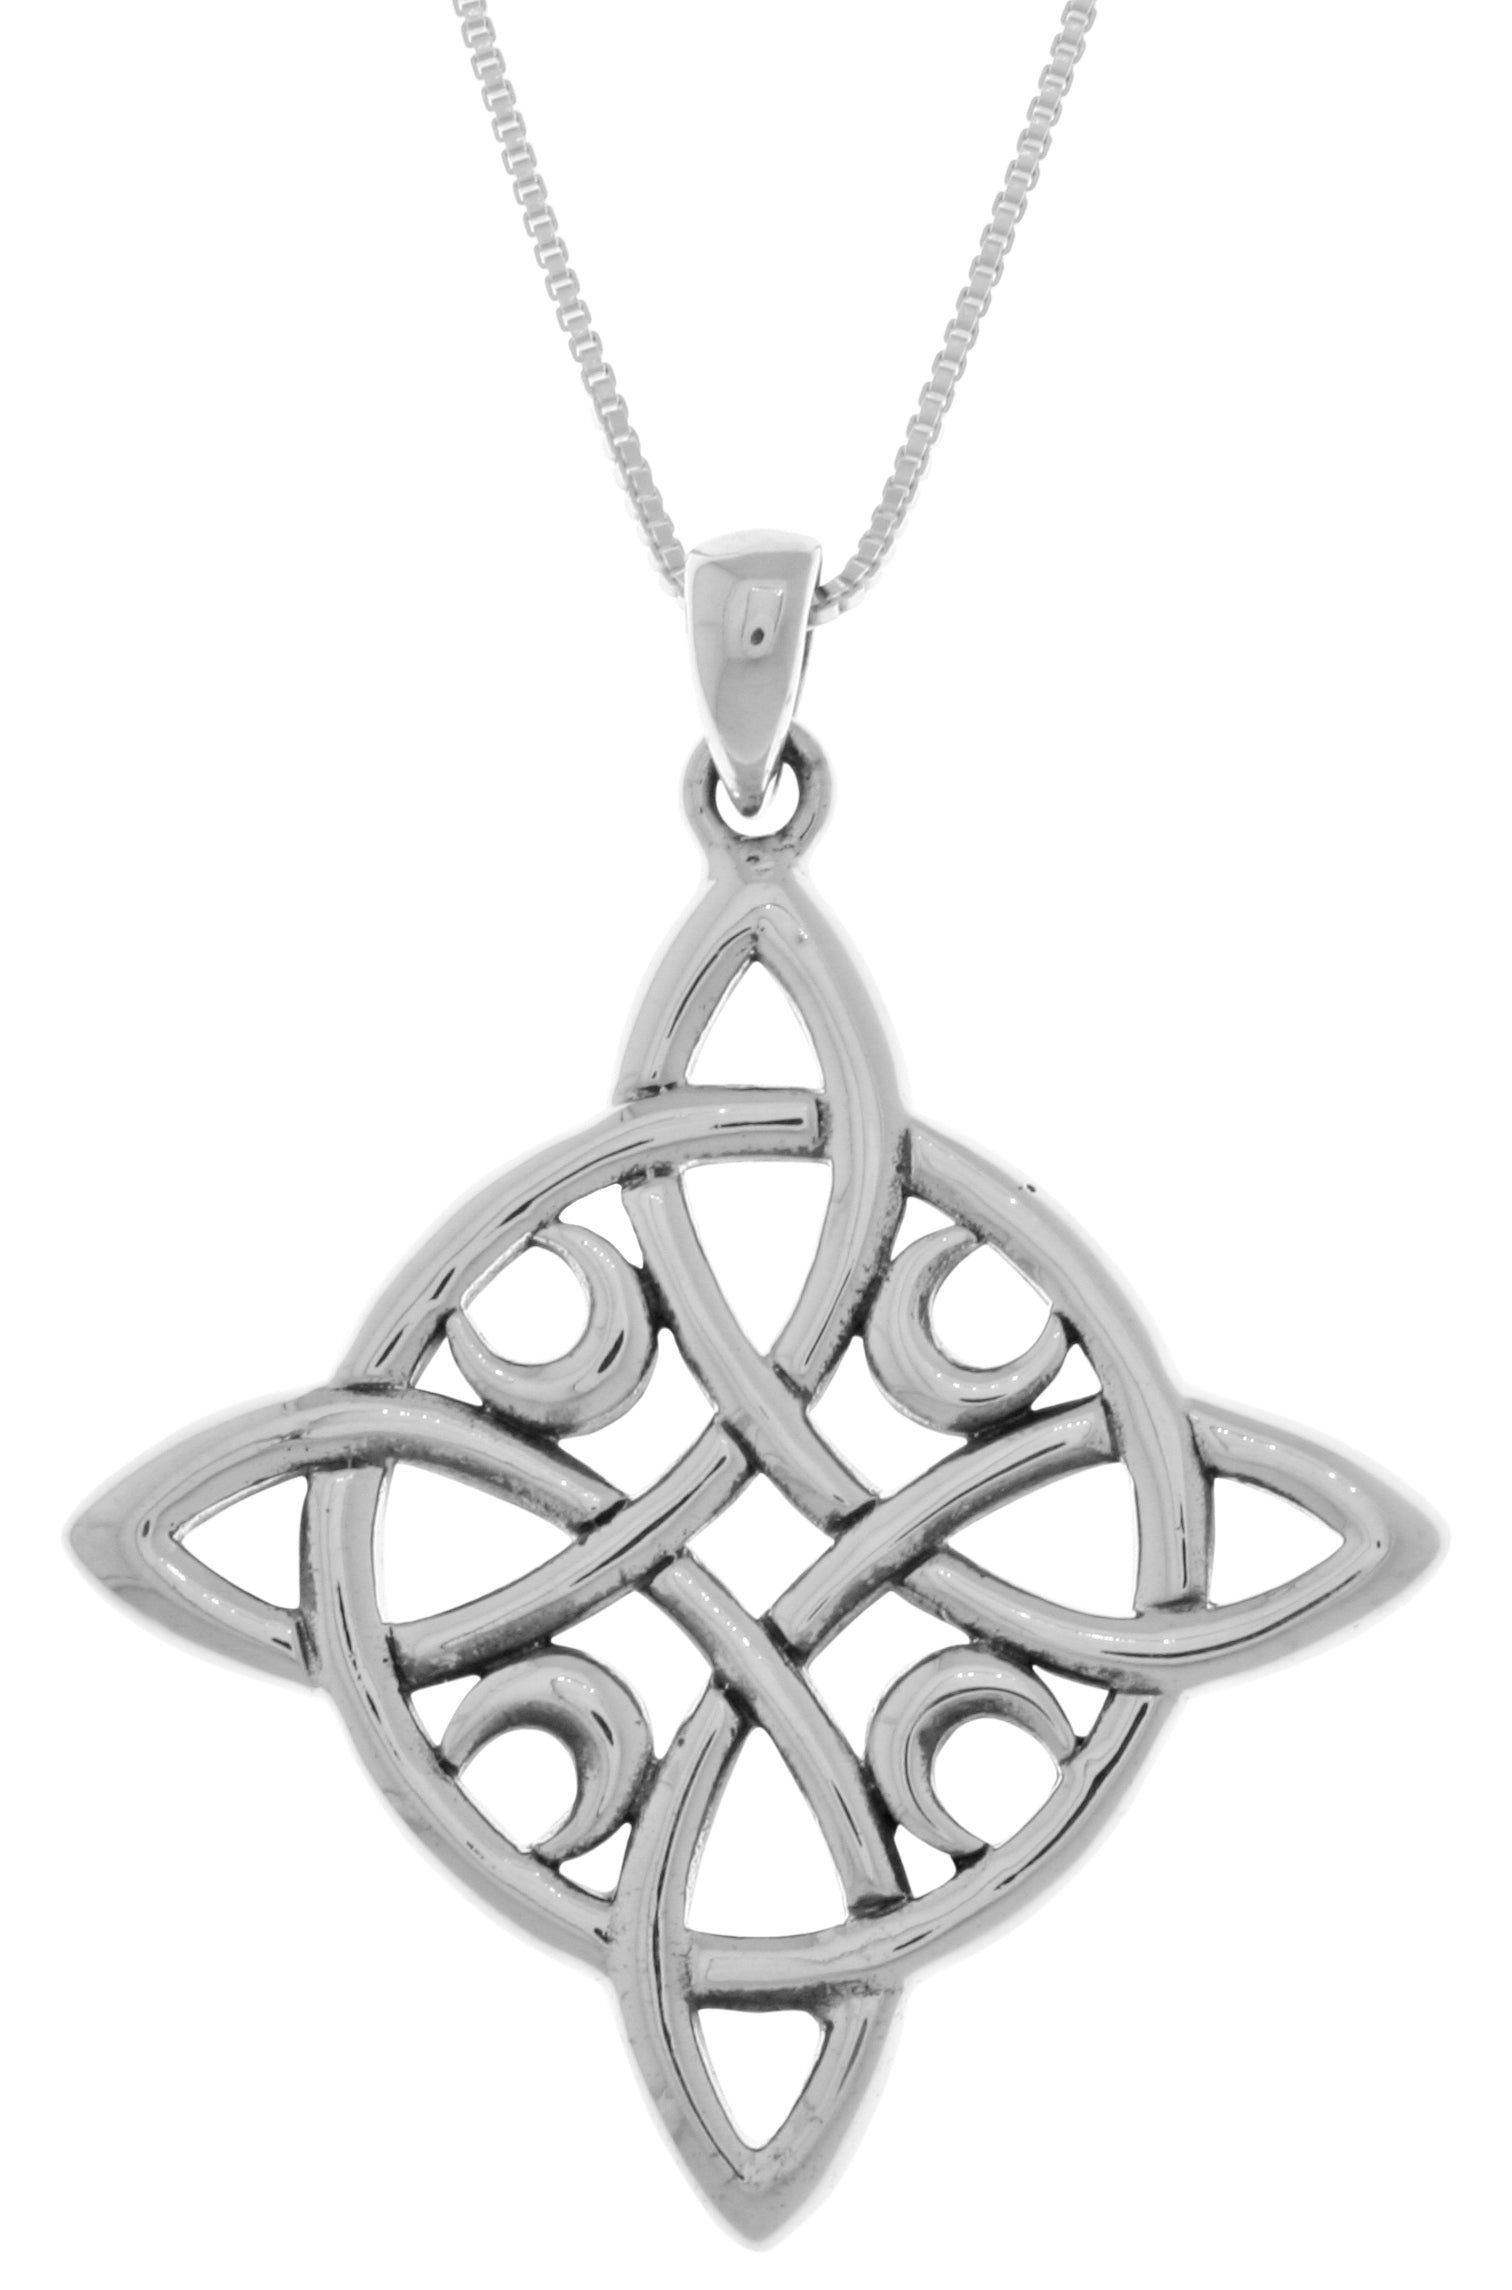 Claddagh Necklace - Love Knot Necklace In Round Shape